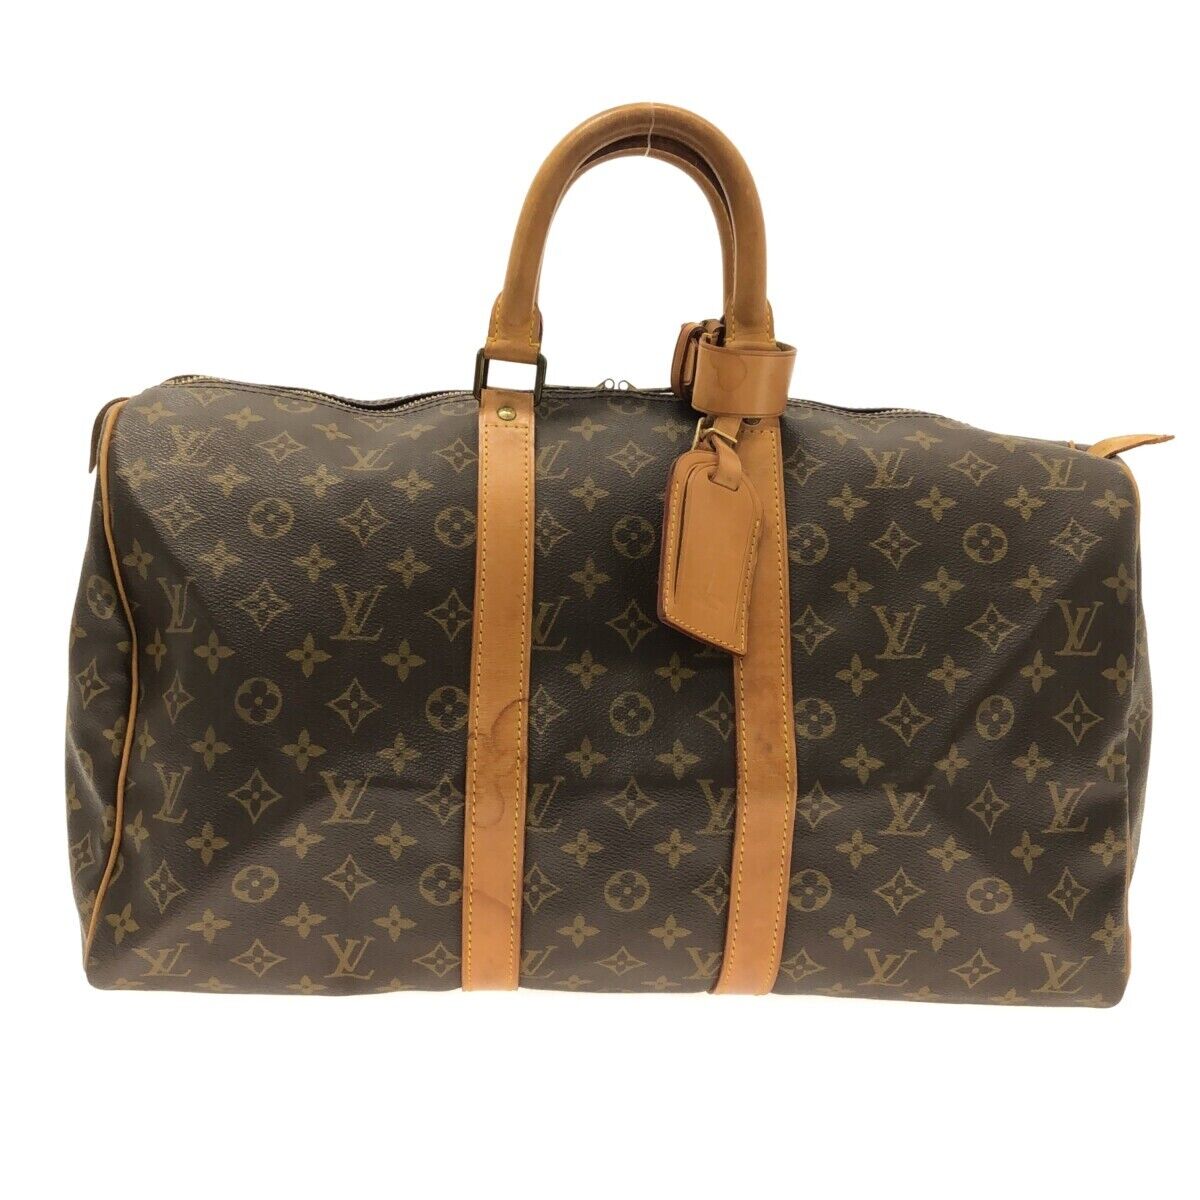 LOUIS VUITTON Keepall 45 Leather Monogram Travel Bag Classic Vintage  Holdall